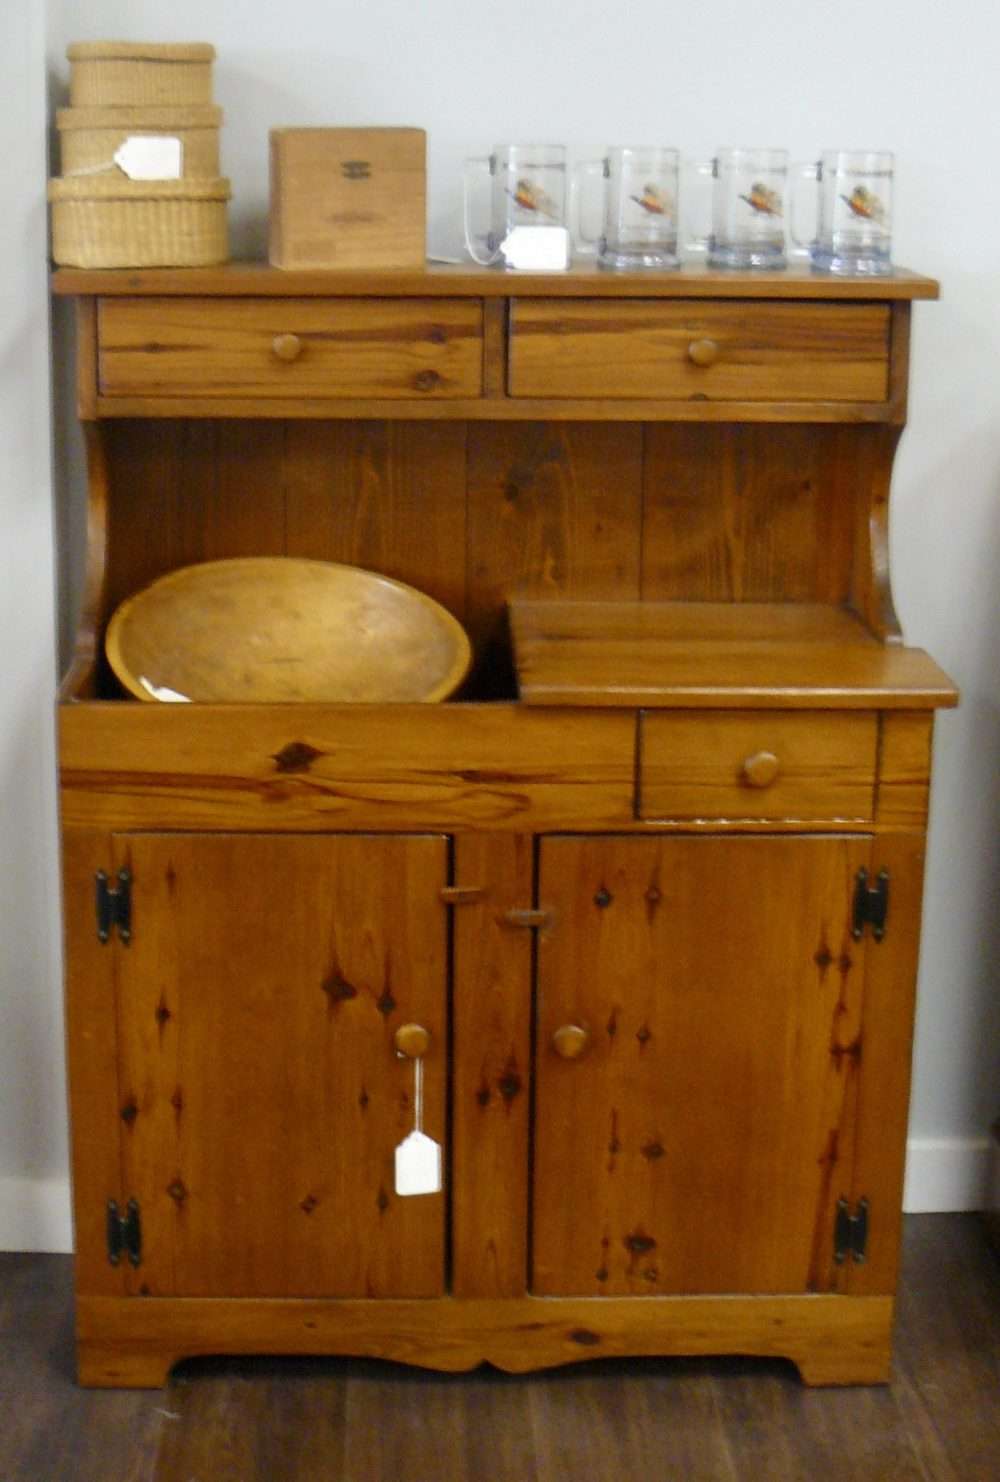 Fenton Glass A Knotty Pine Dry Sink And A Hull Cookie Jar